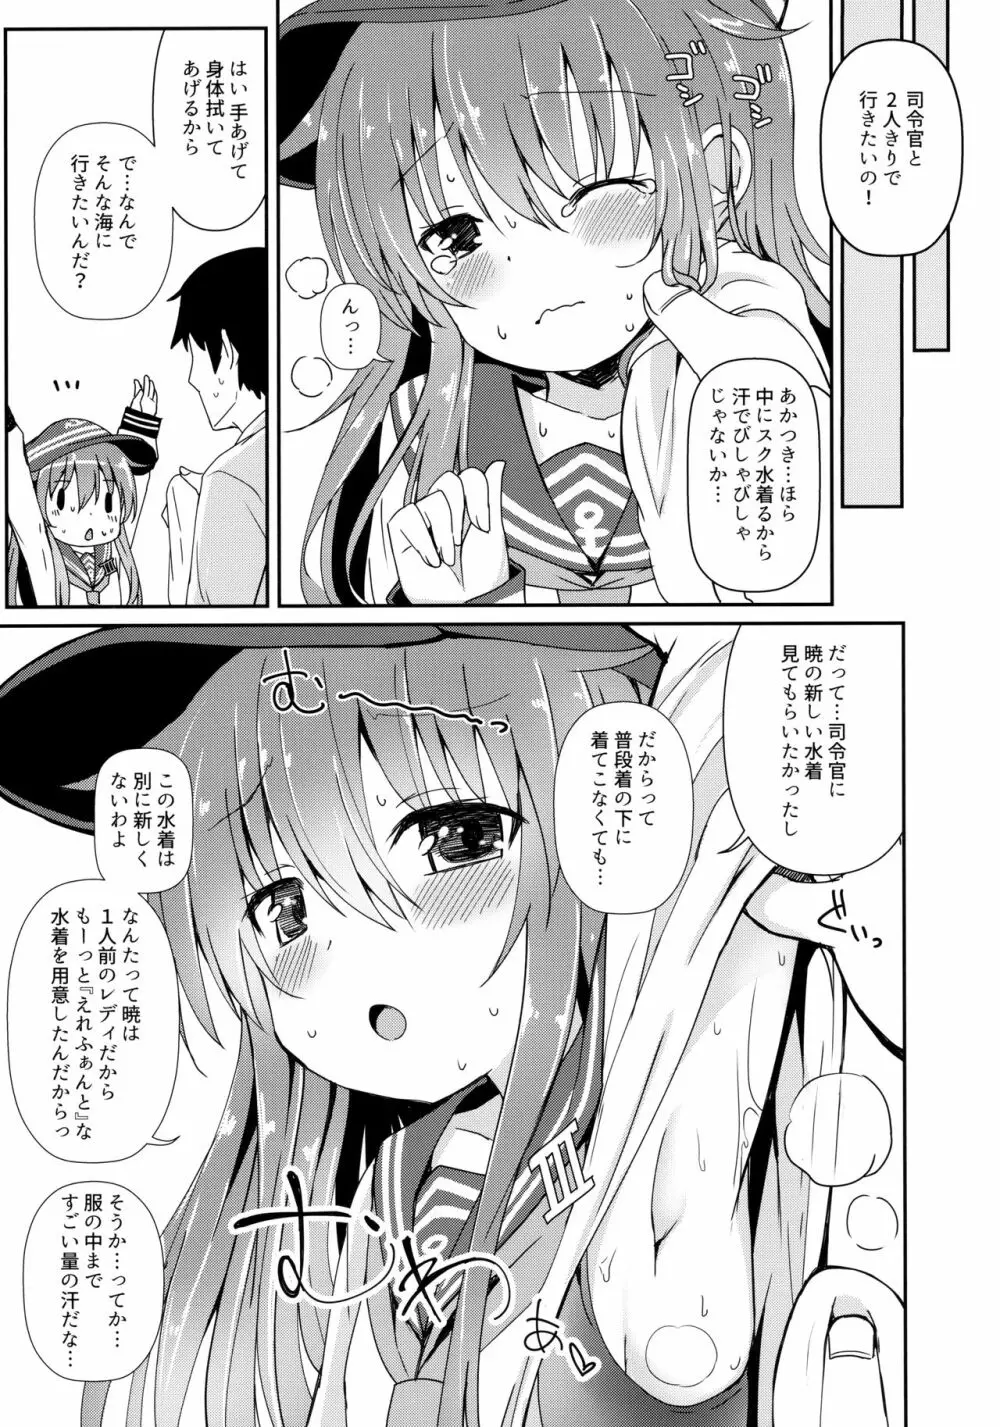 Destroyer SWEET DROPS 暁 - page6